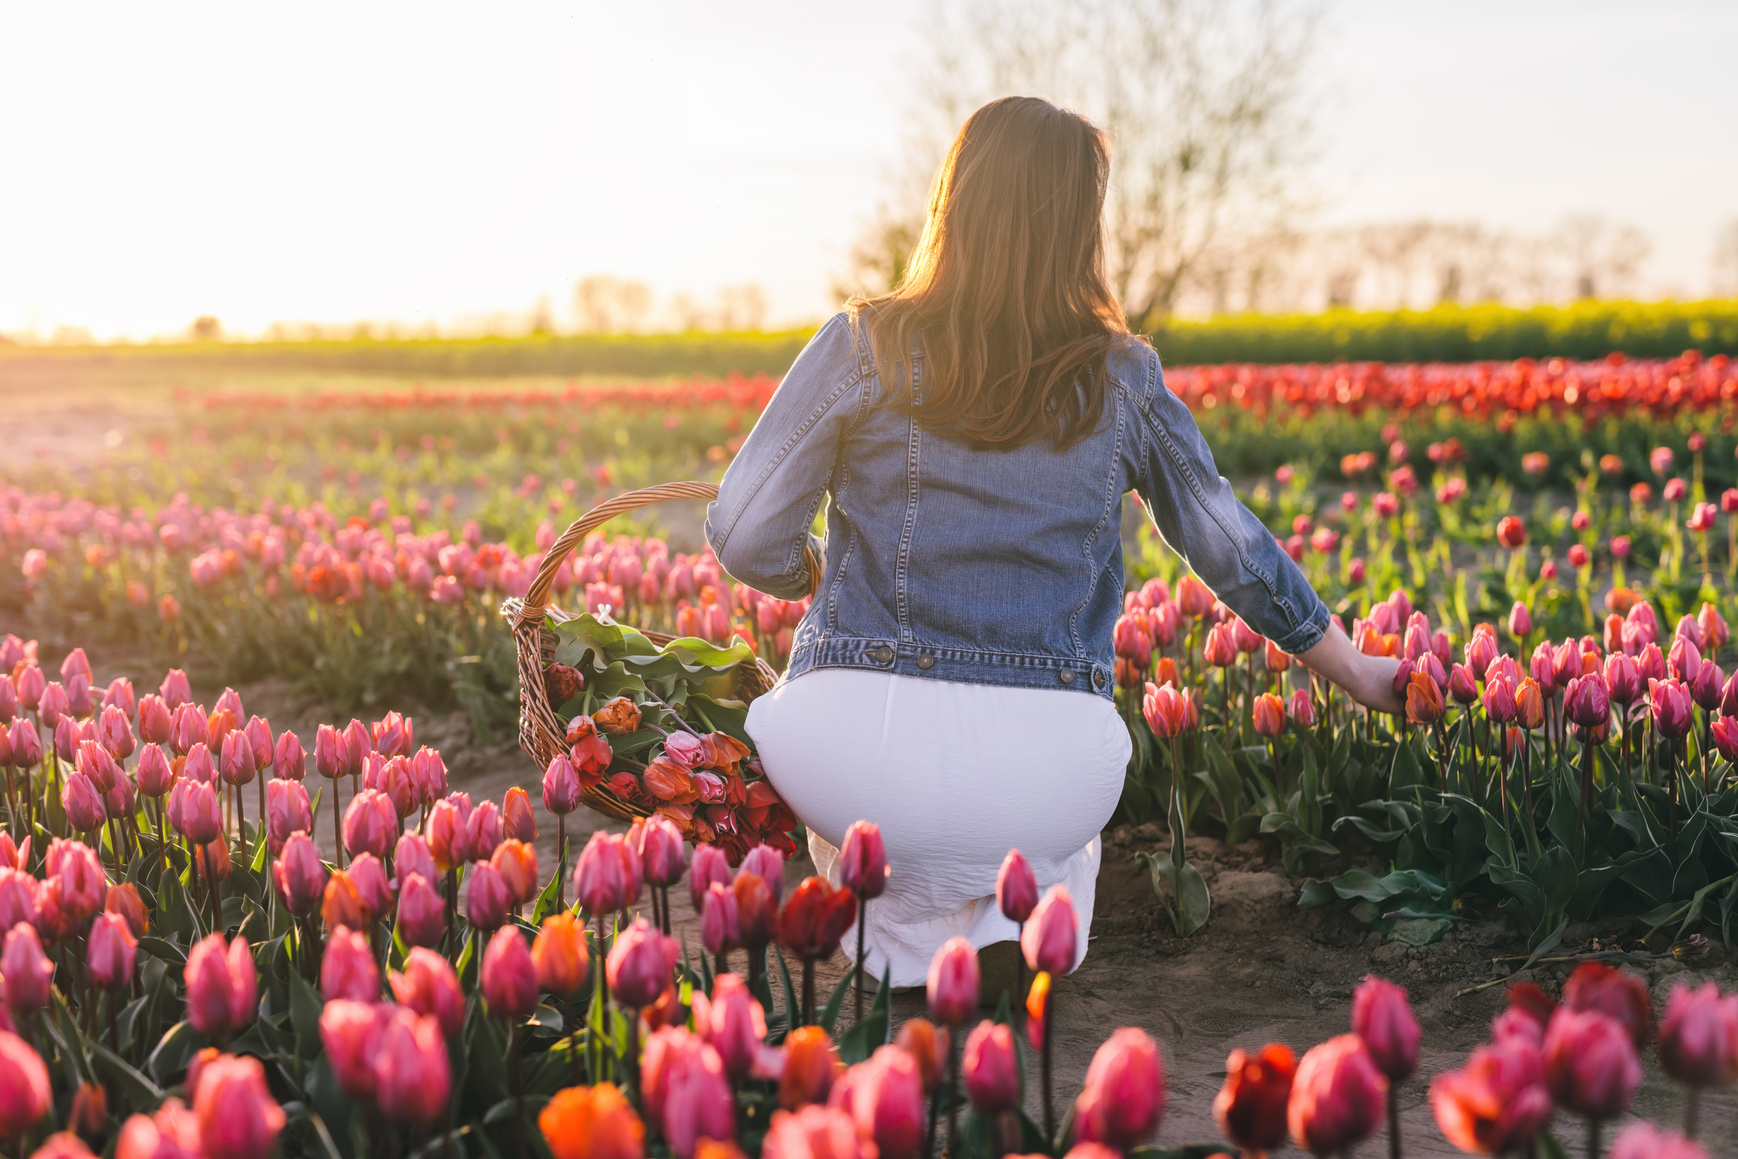 Woman picking flowers on tulip field in spring